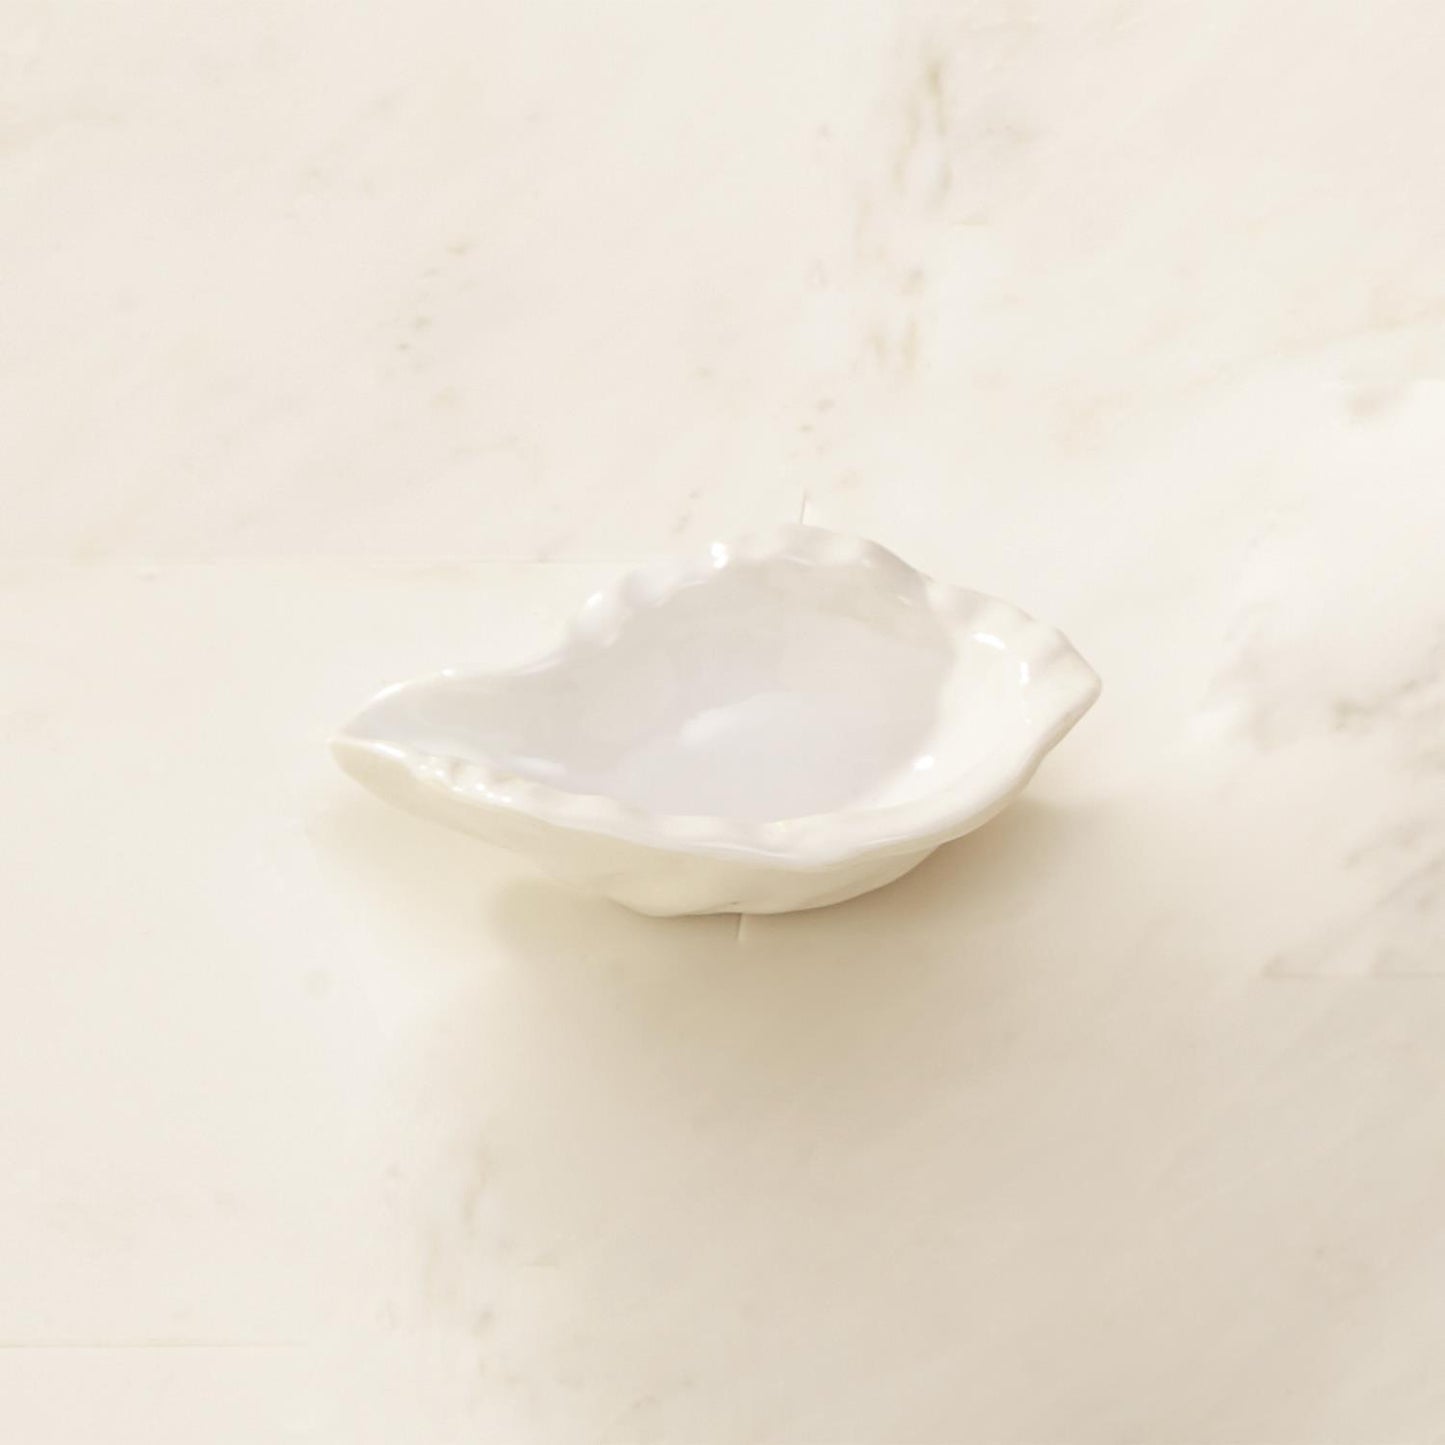 Oyster Plate Set